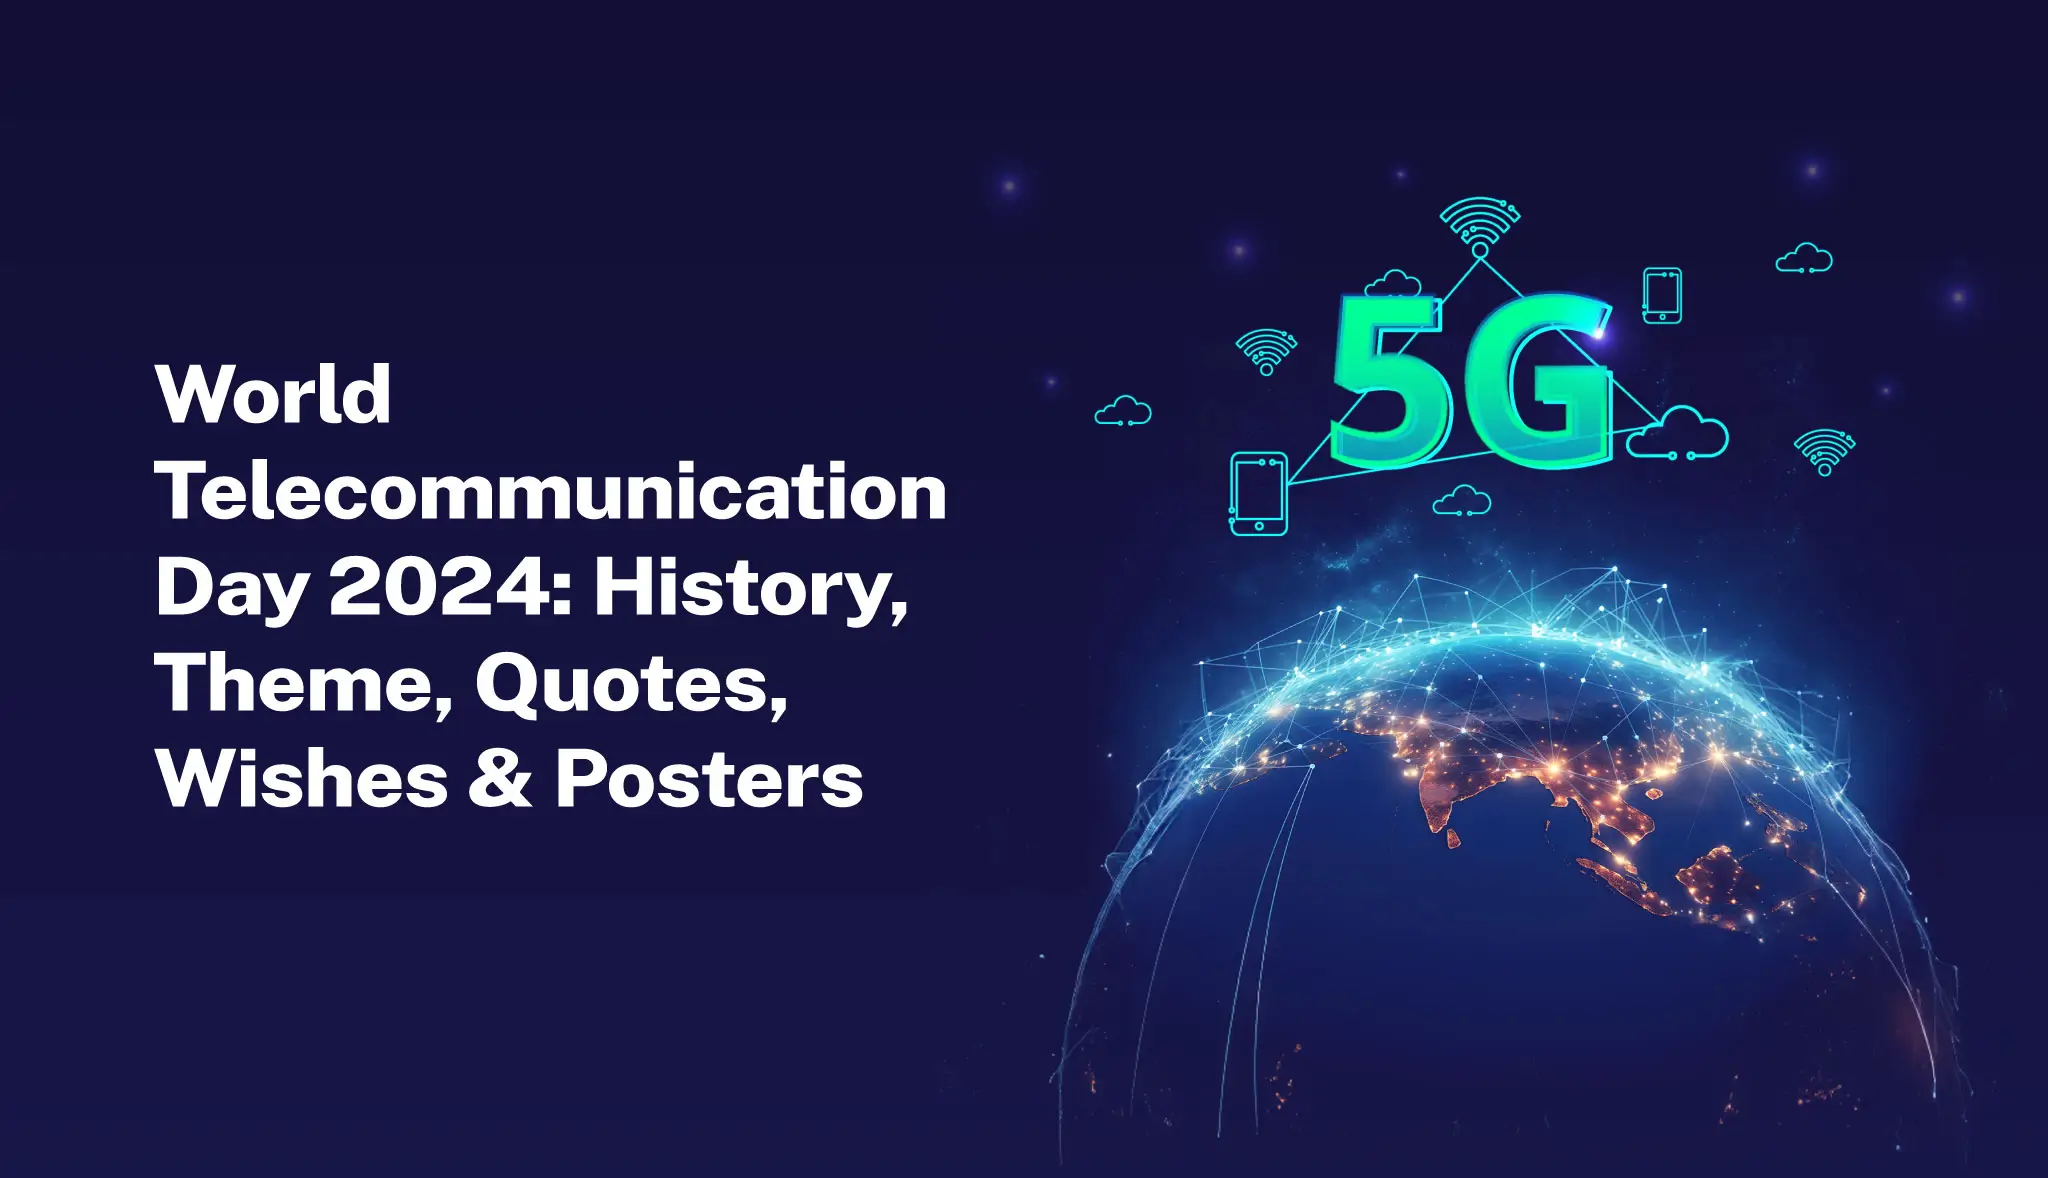 World Telecommunication Day 2024: History, Theme, Quotes, Wishes & Posters